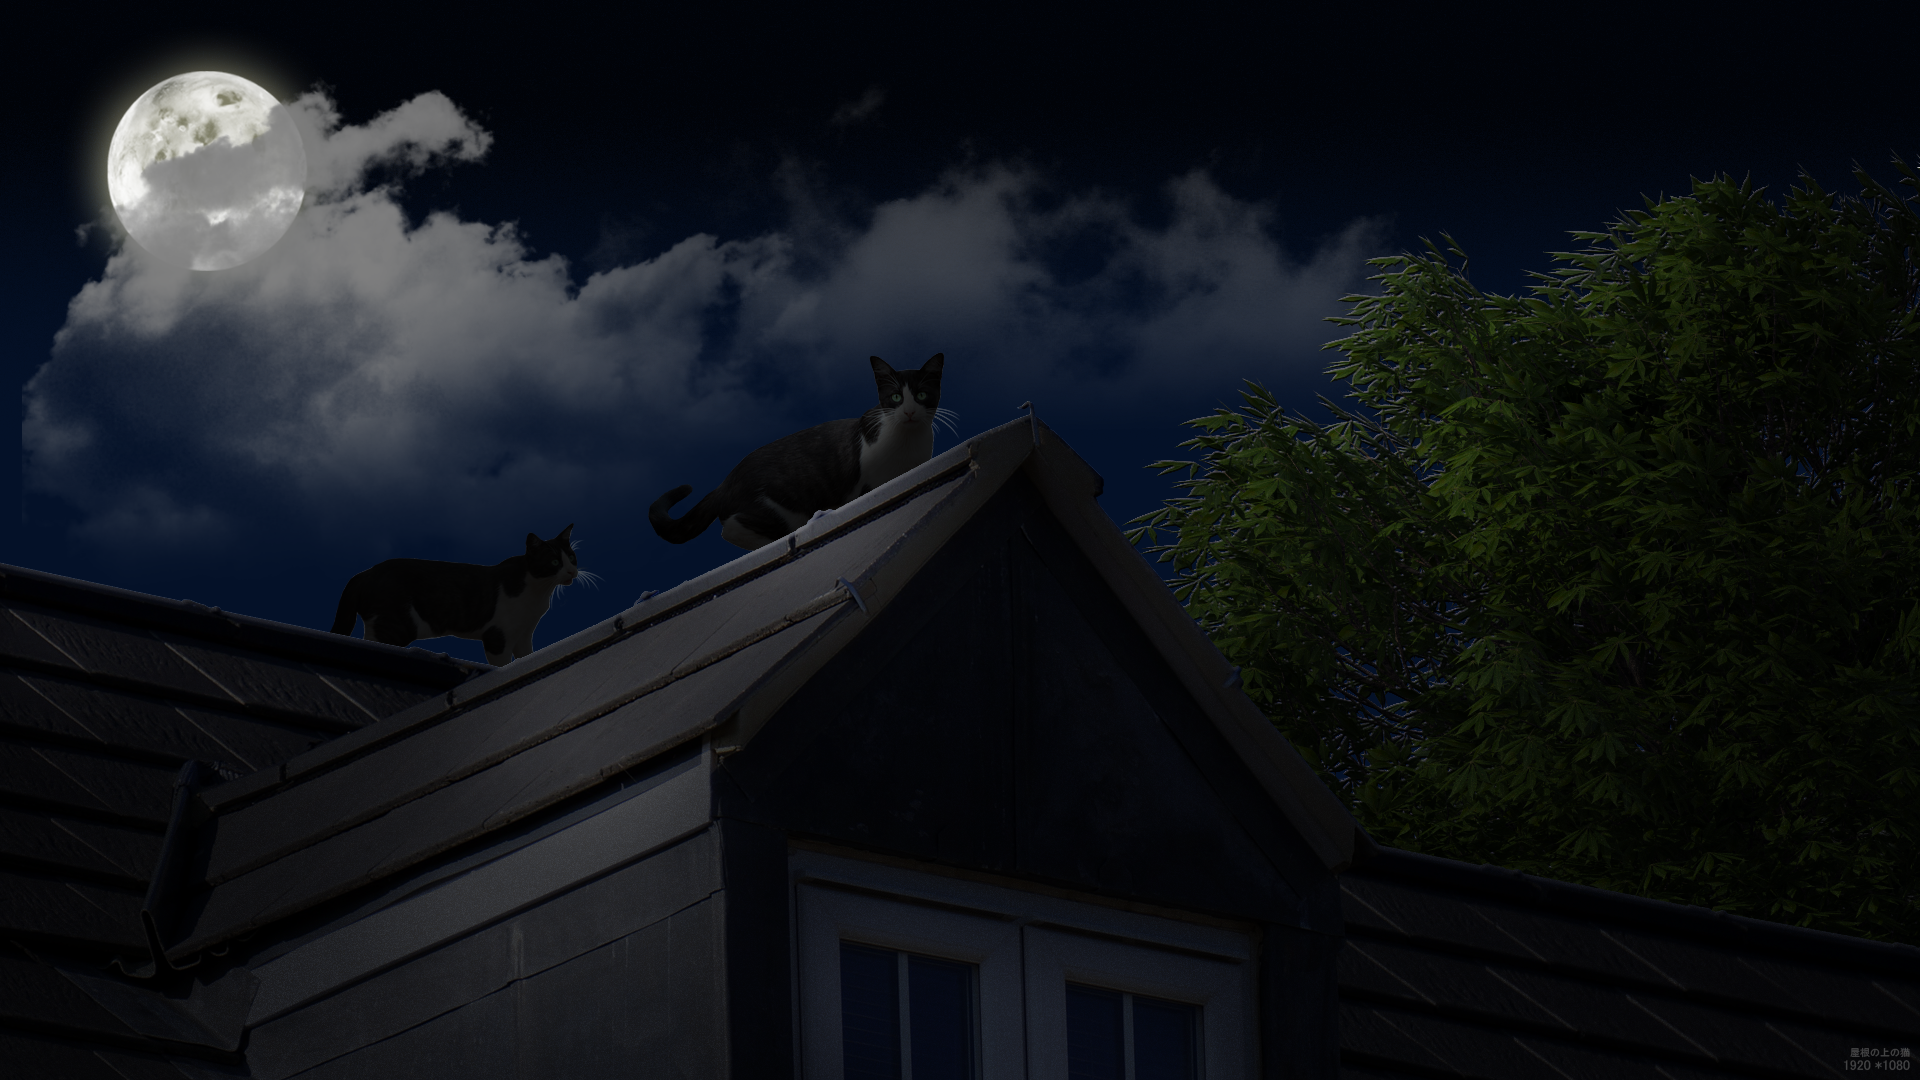 General 1920x1080 cats dark rooftops Moon house night